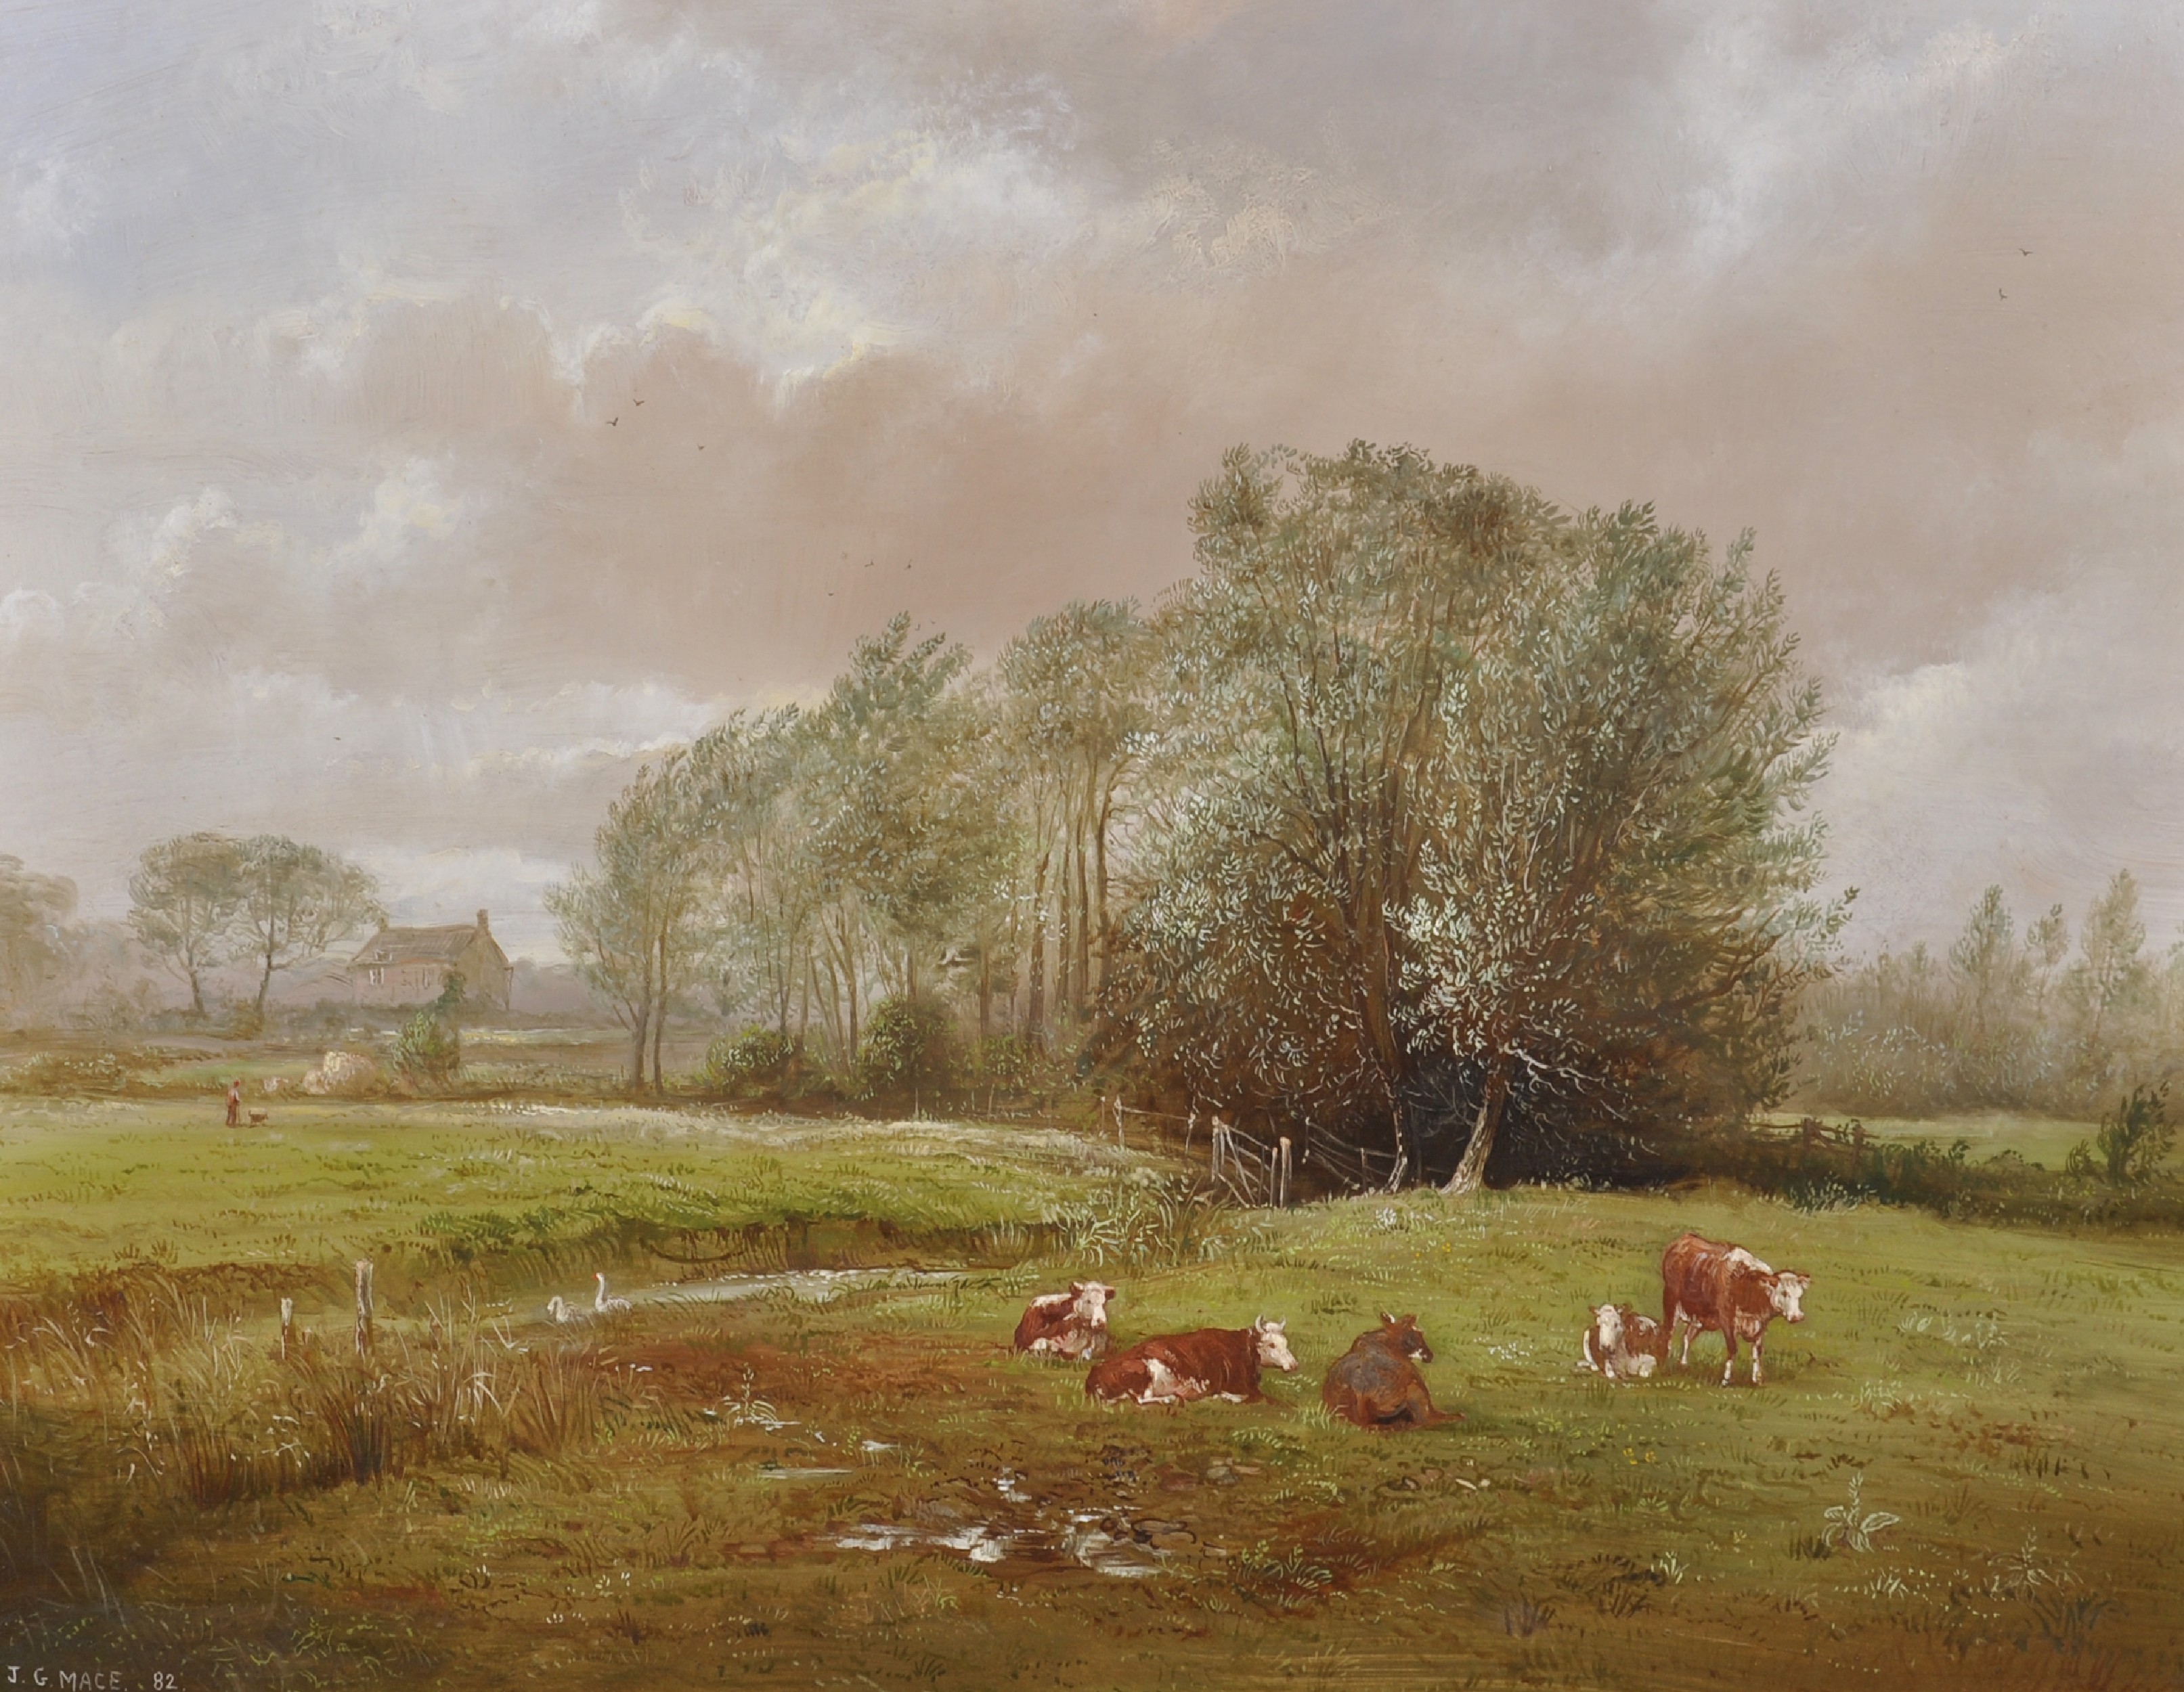 John G Mace (20th - 21st Century) British. A River Landscape, with Cattle in a Field, Oil on